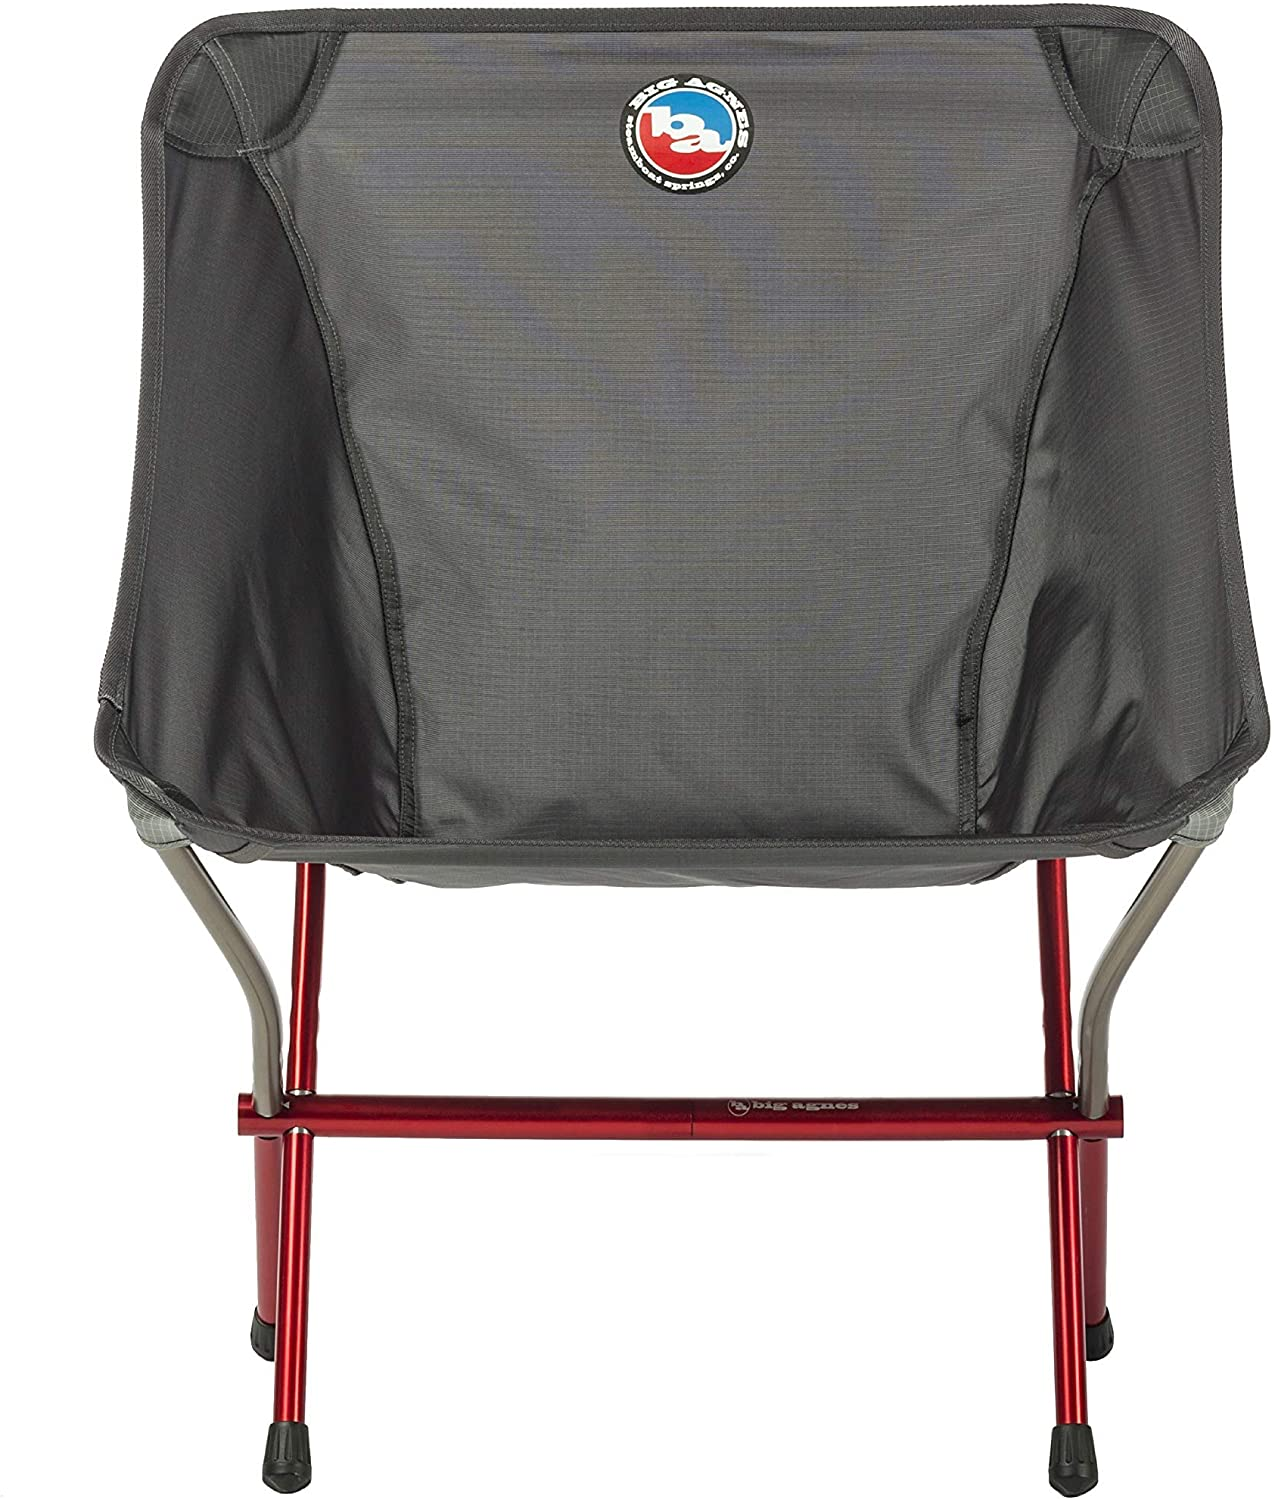 small camp chair that works good for kayak camping